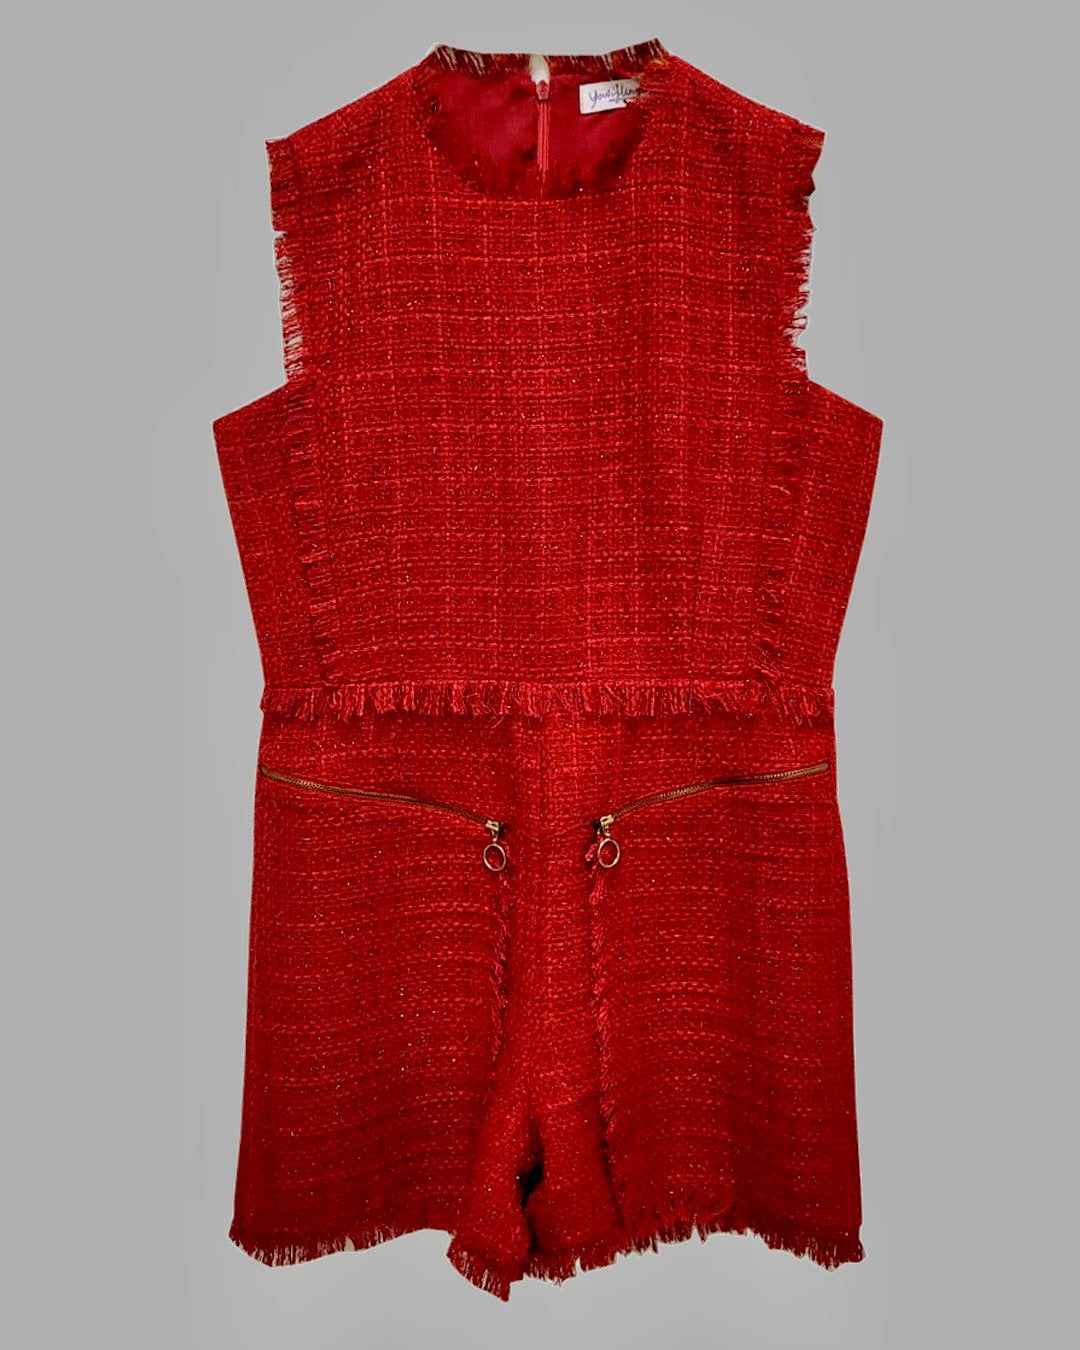 SCARLET SLEEVELESS PLAYSUIT WITH RAW EDGES DETAILING AND A ZIP FASTENING.